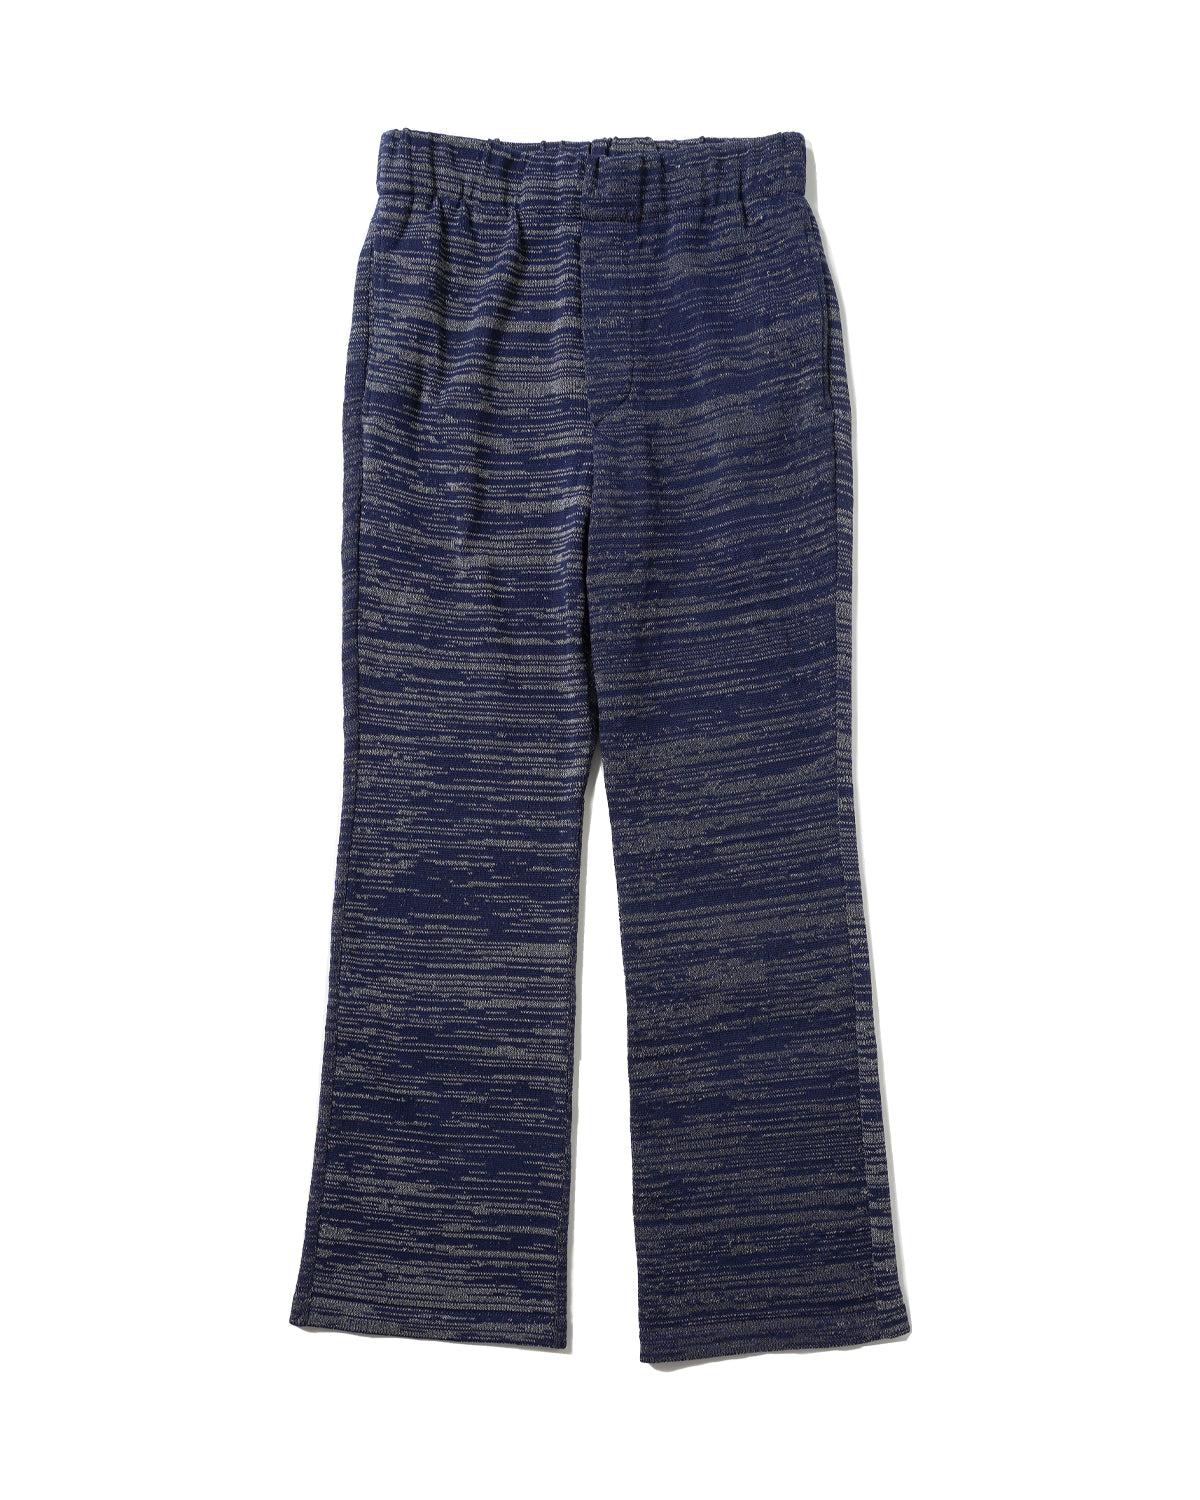 REFLECTOR KNIT PANTS (NVY) - Baby's all right